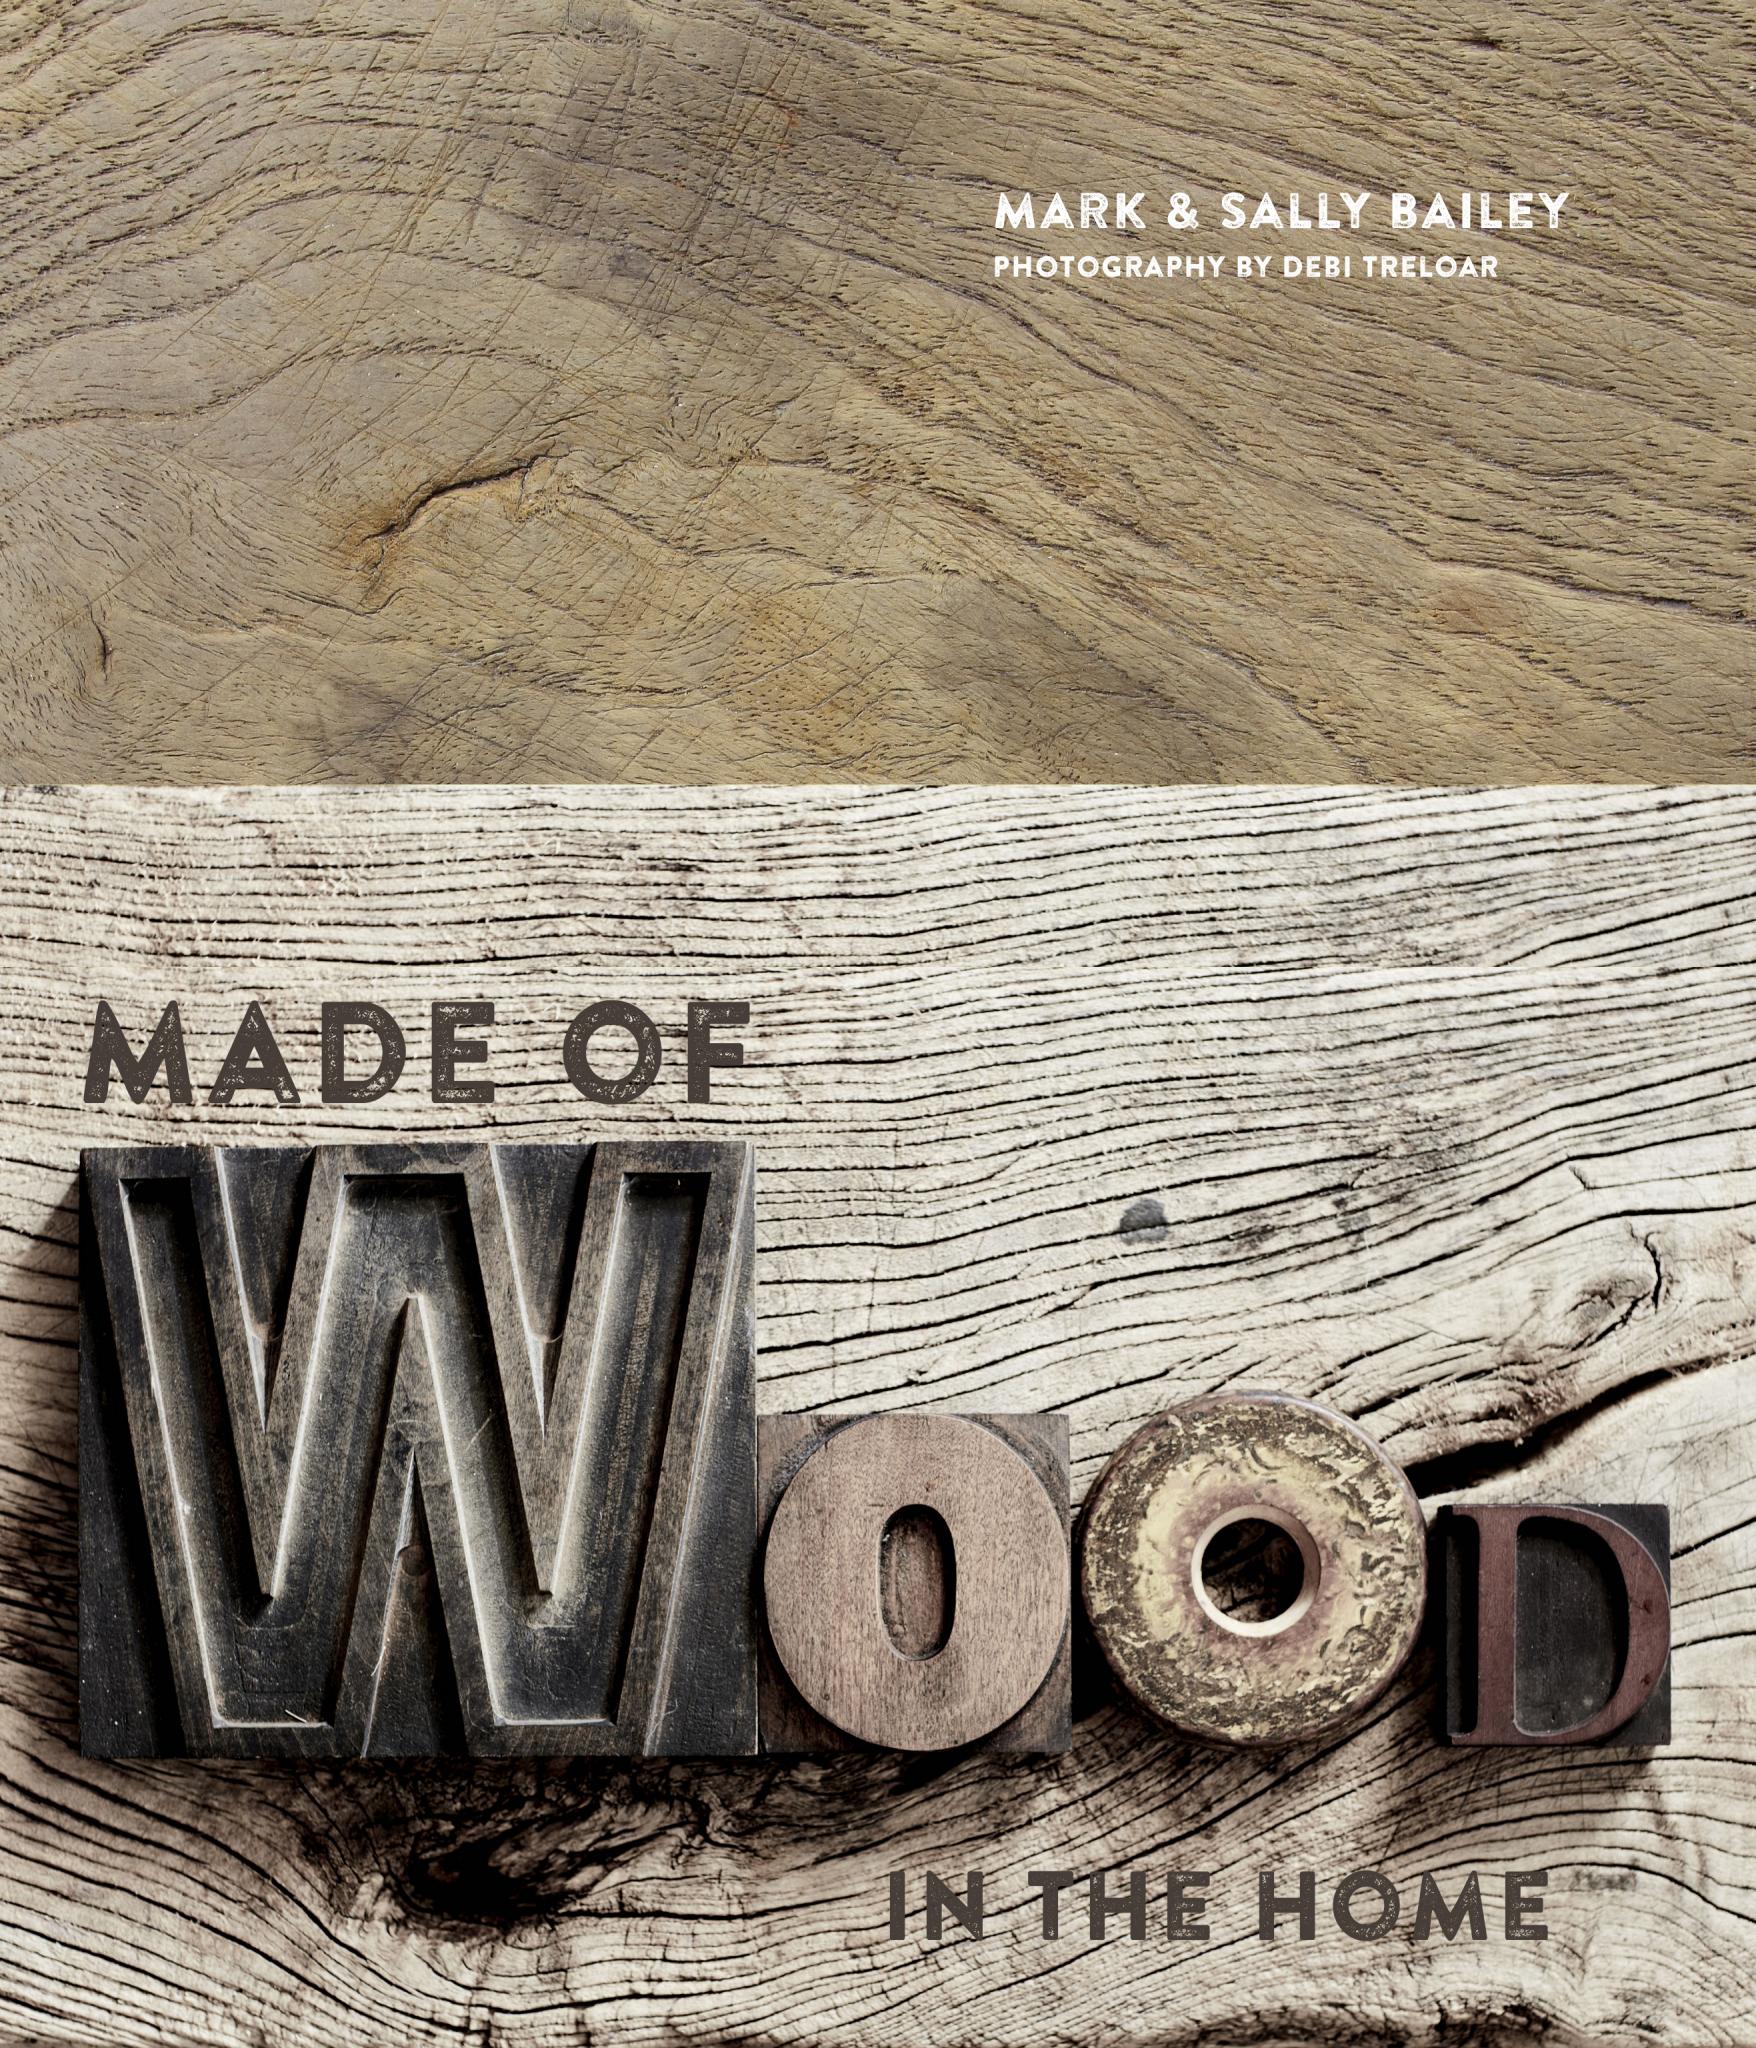 MADE OF WOOD - BAILEY HOME BOOK